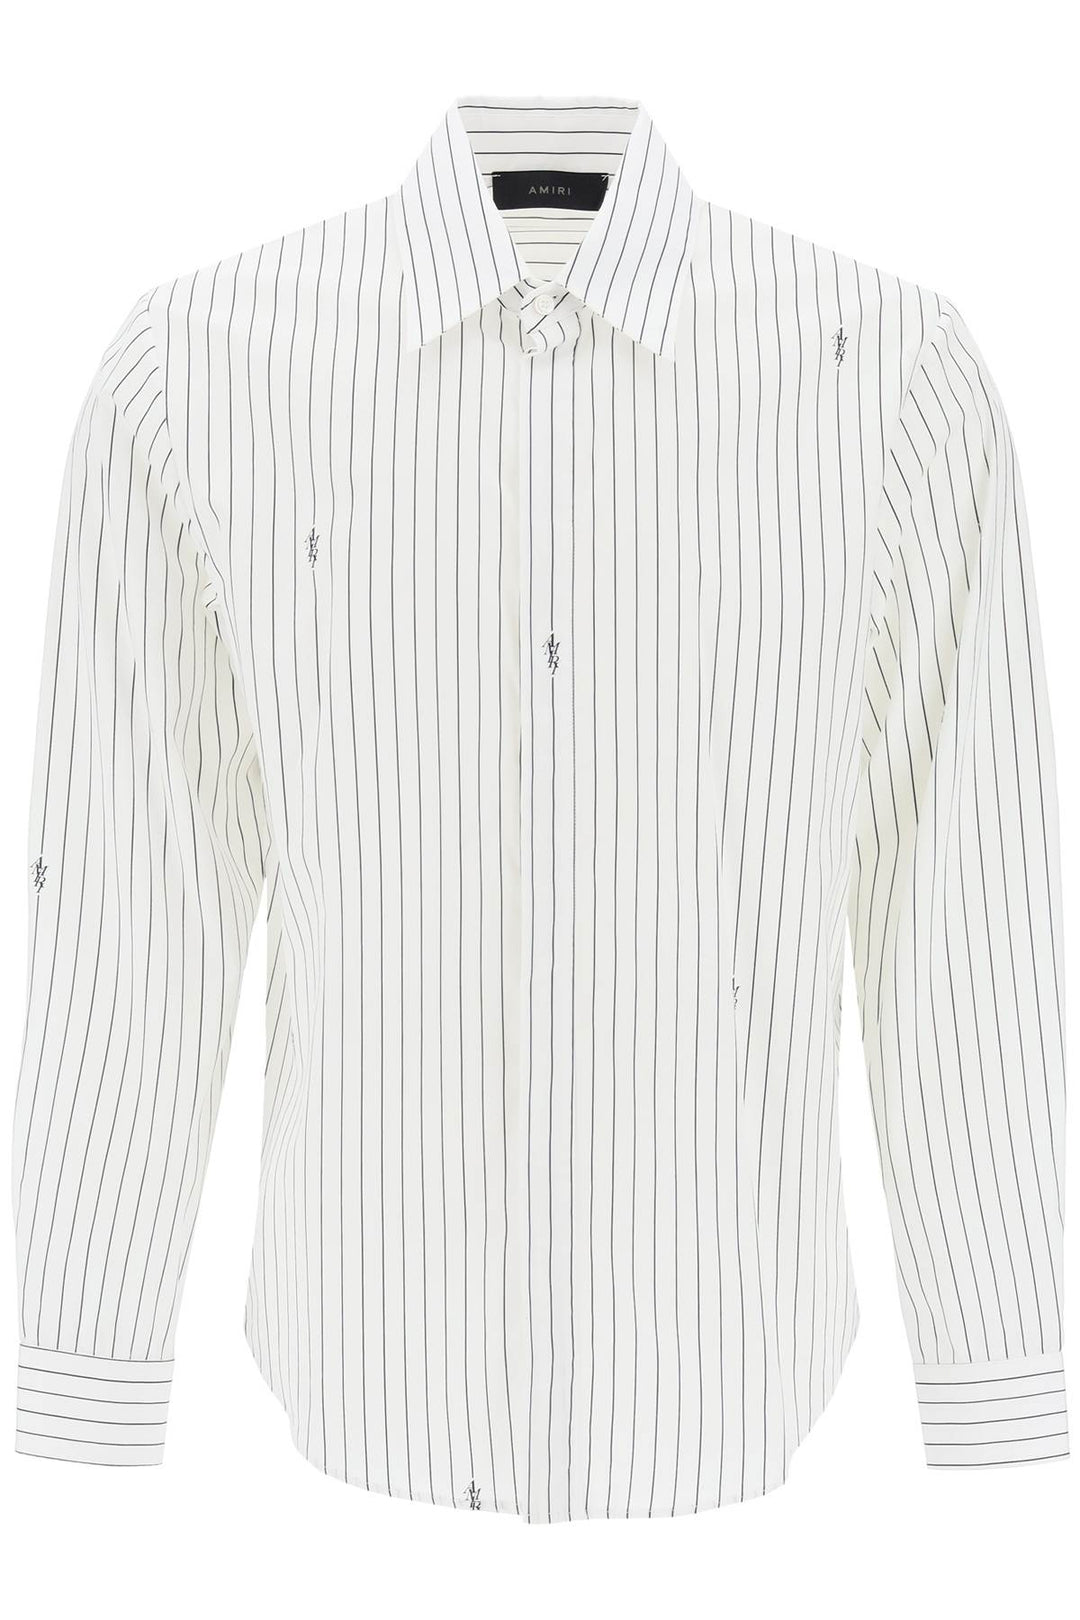 Amiri striped shirt with staggered logo-0